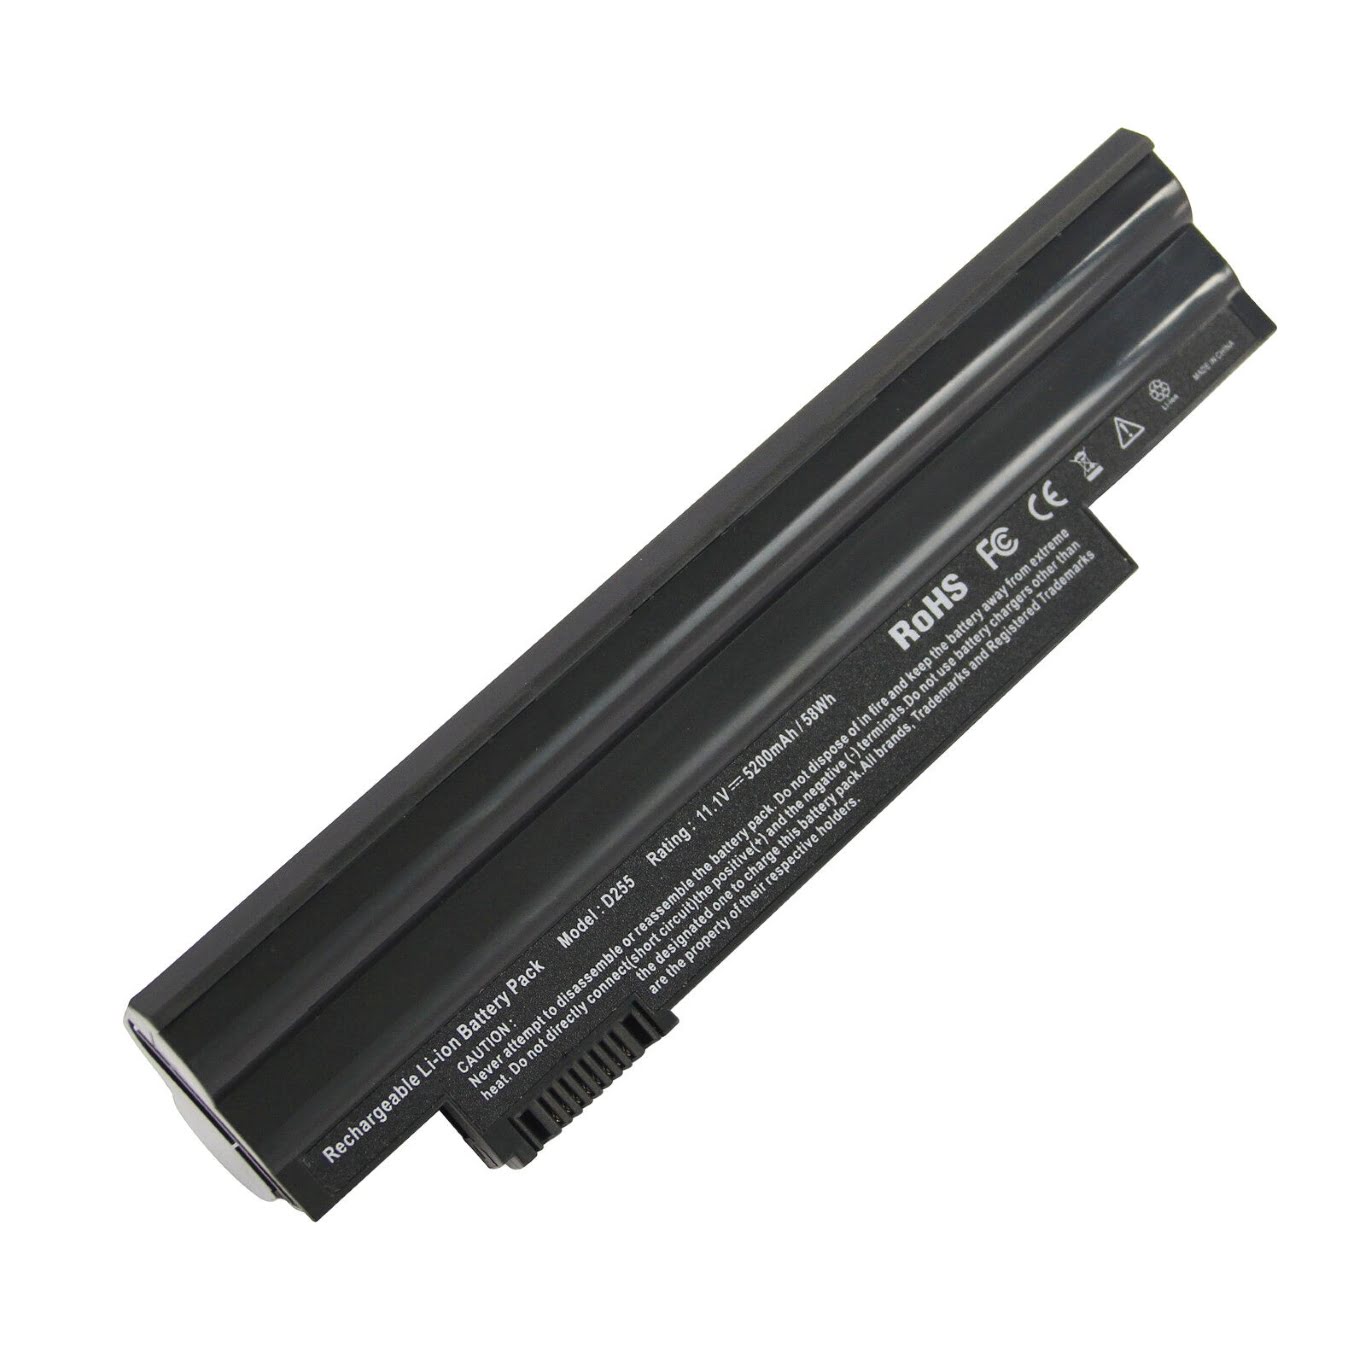 AK.003BT.071, AK.006BT.074 replacement Laptop Battery for Acer Aspire one 360 (D260), Aspire one 522, 6 cells, 11.1 V, 5200 Mah